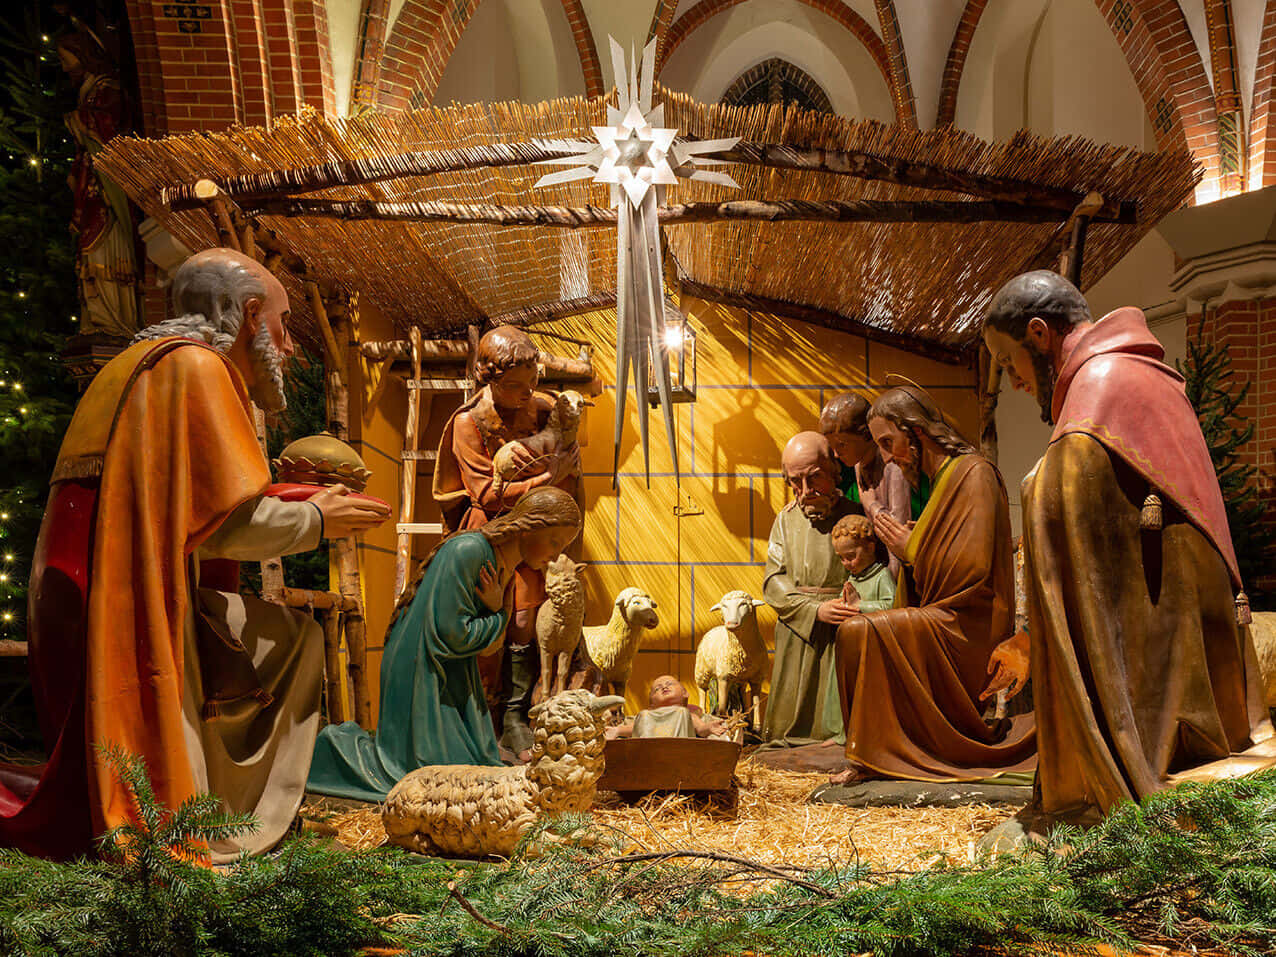 The Birth of Jesus as depicted in a Nativity Scene.